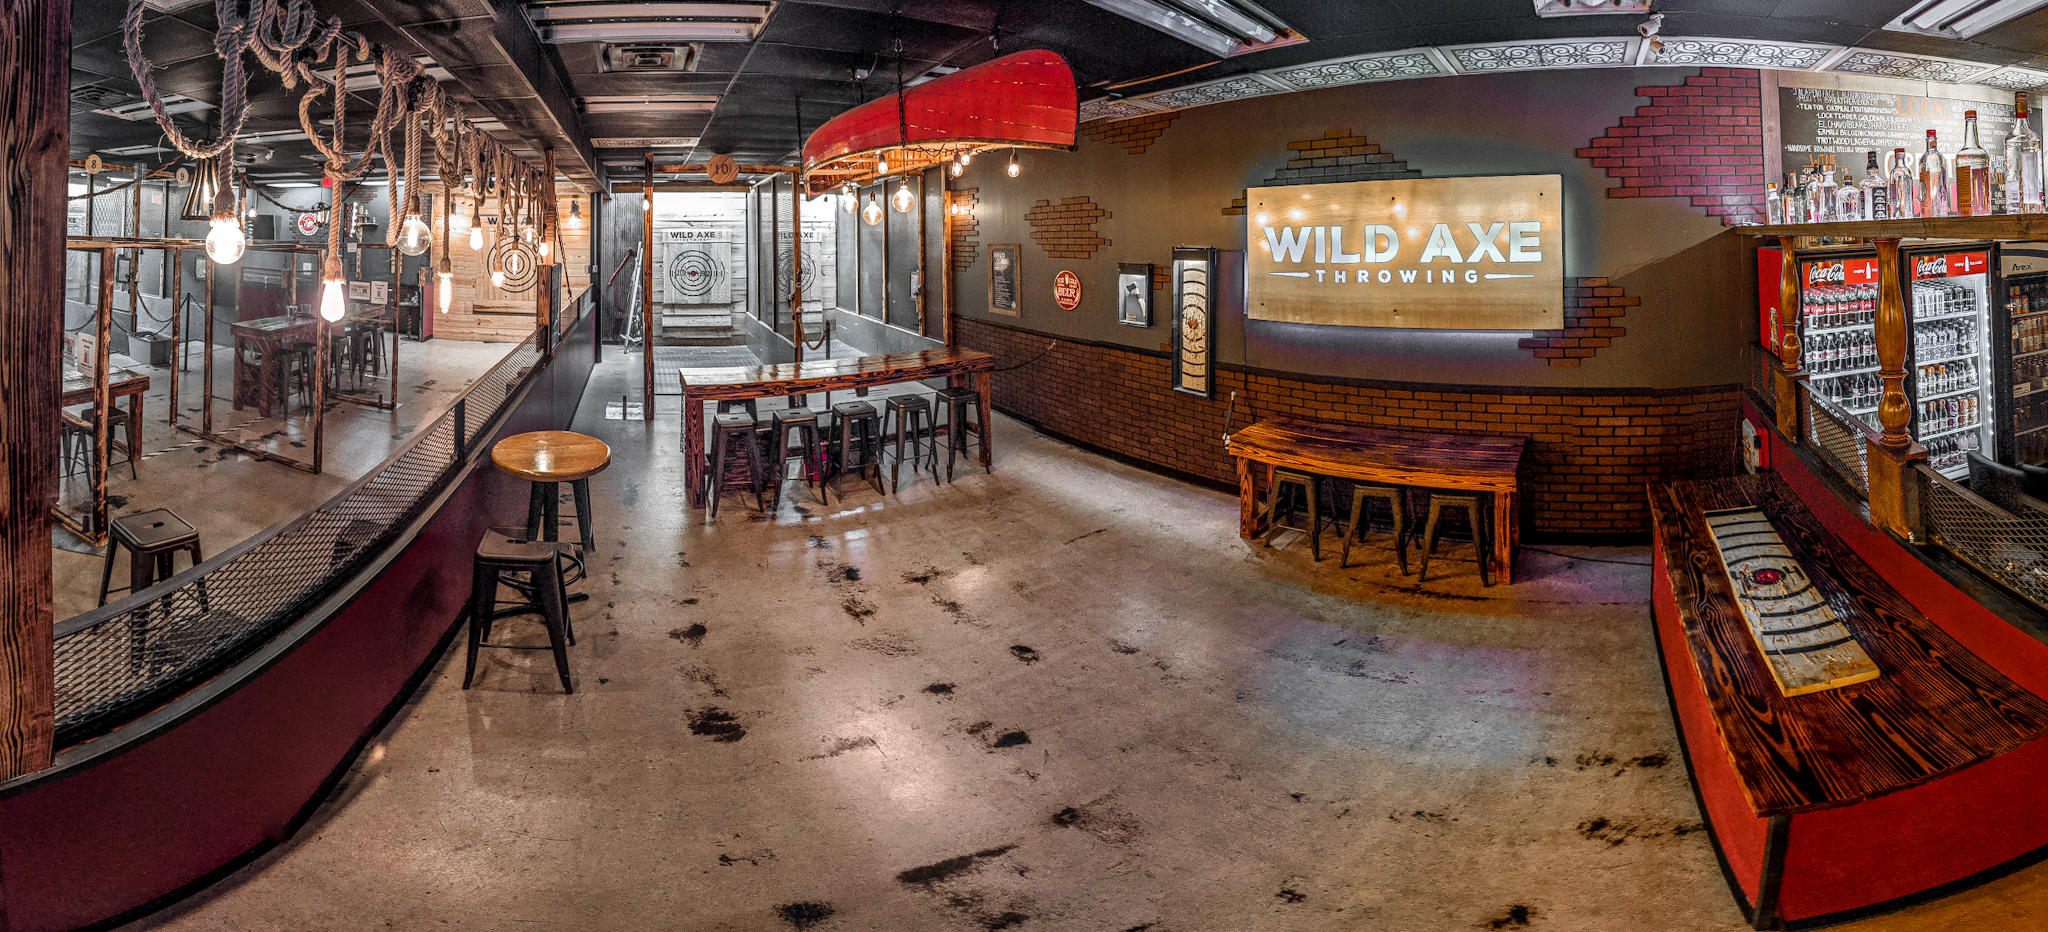 Wild Axe Throwing is the only axe throwing facility in the world that has a party room with dedicated throwing lanes! You are able to bring your own food into our party room. We have a liquor license and a fully stocked bar to make your experience with us perfect!